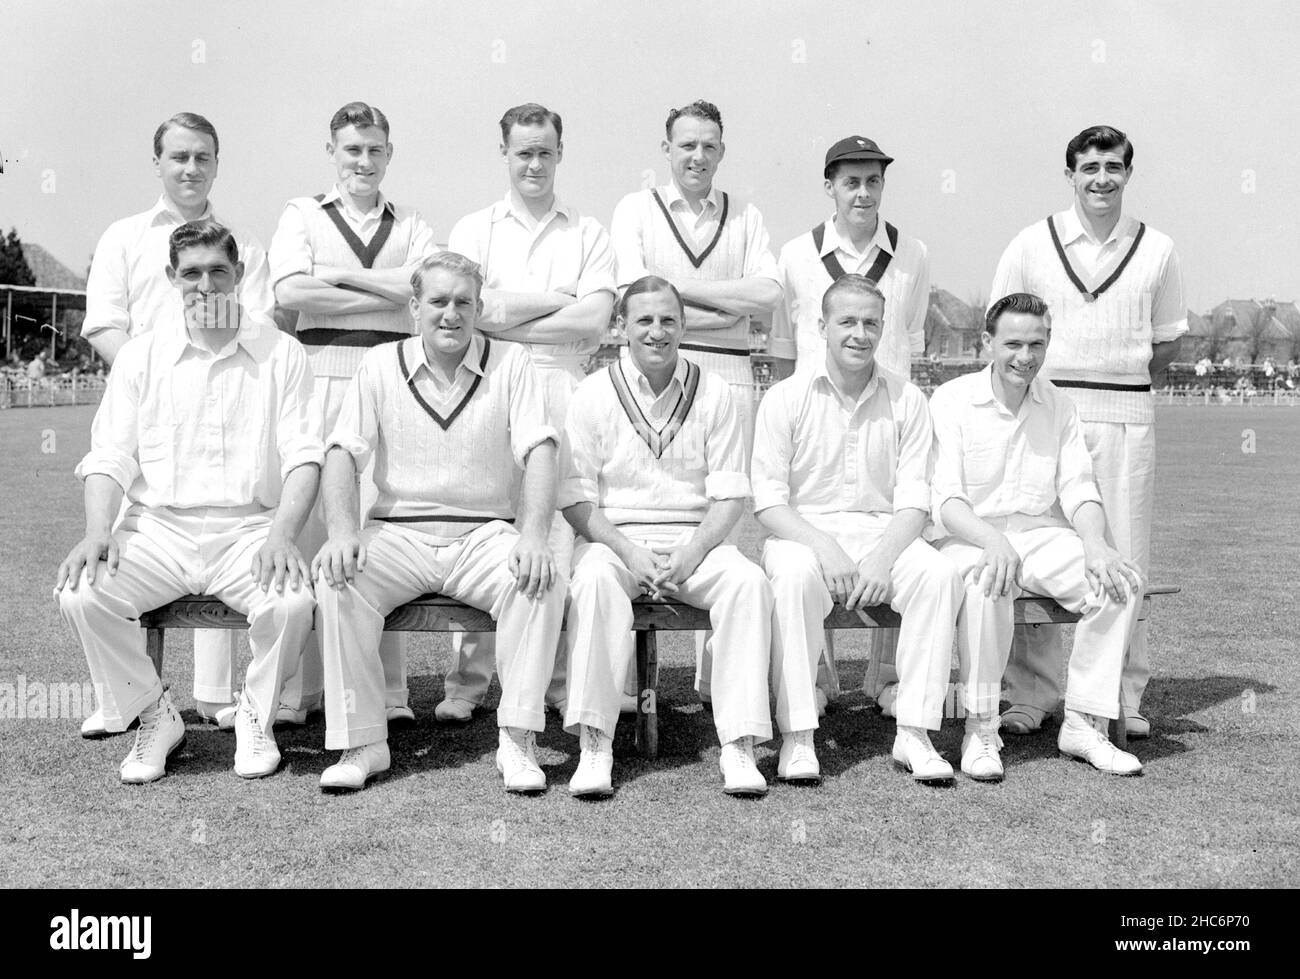 File photo dated 21-05-1954 of the players of the Yorkshire cricket team (back row, left to right) Lister, Illingworth, Close, Appleyard, Booth, Trueman, (front row, left to right) Wilson, Wardle, Hutton, Watson and Lowson. Former cricketer Ray Illingworth has died at the age of 89, Yorkshire have announced. Illingworth, who led England to a Test series victory over Australia Down Under in 1970-71, had been undergoing radiotherapy for esophageal cancer. Issue date: May 21, 1954. Stock Photo